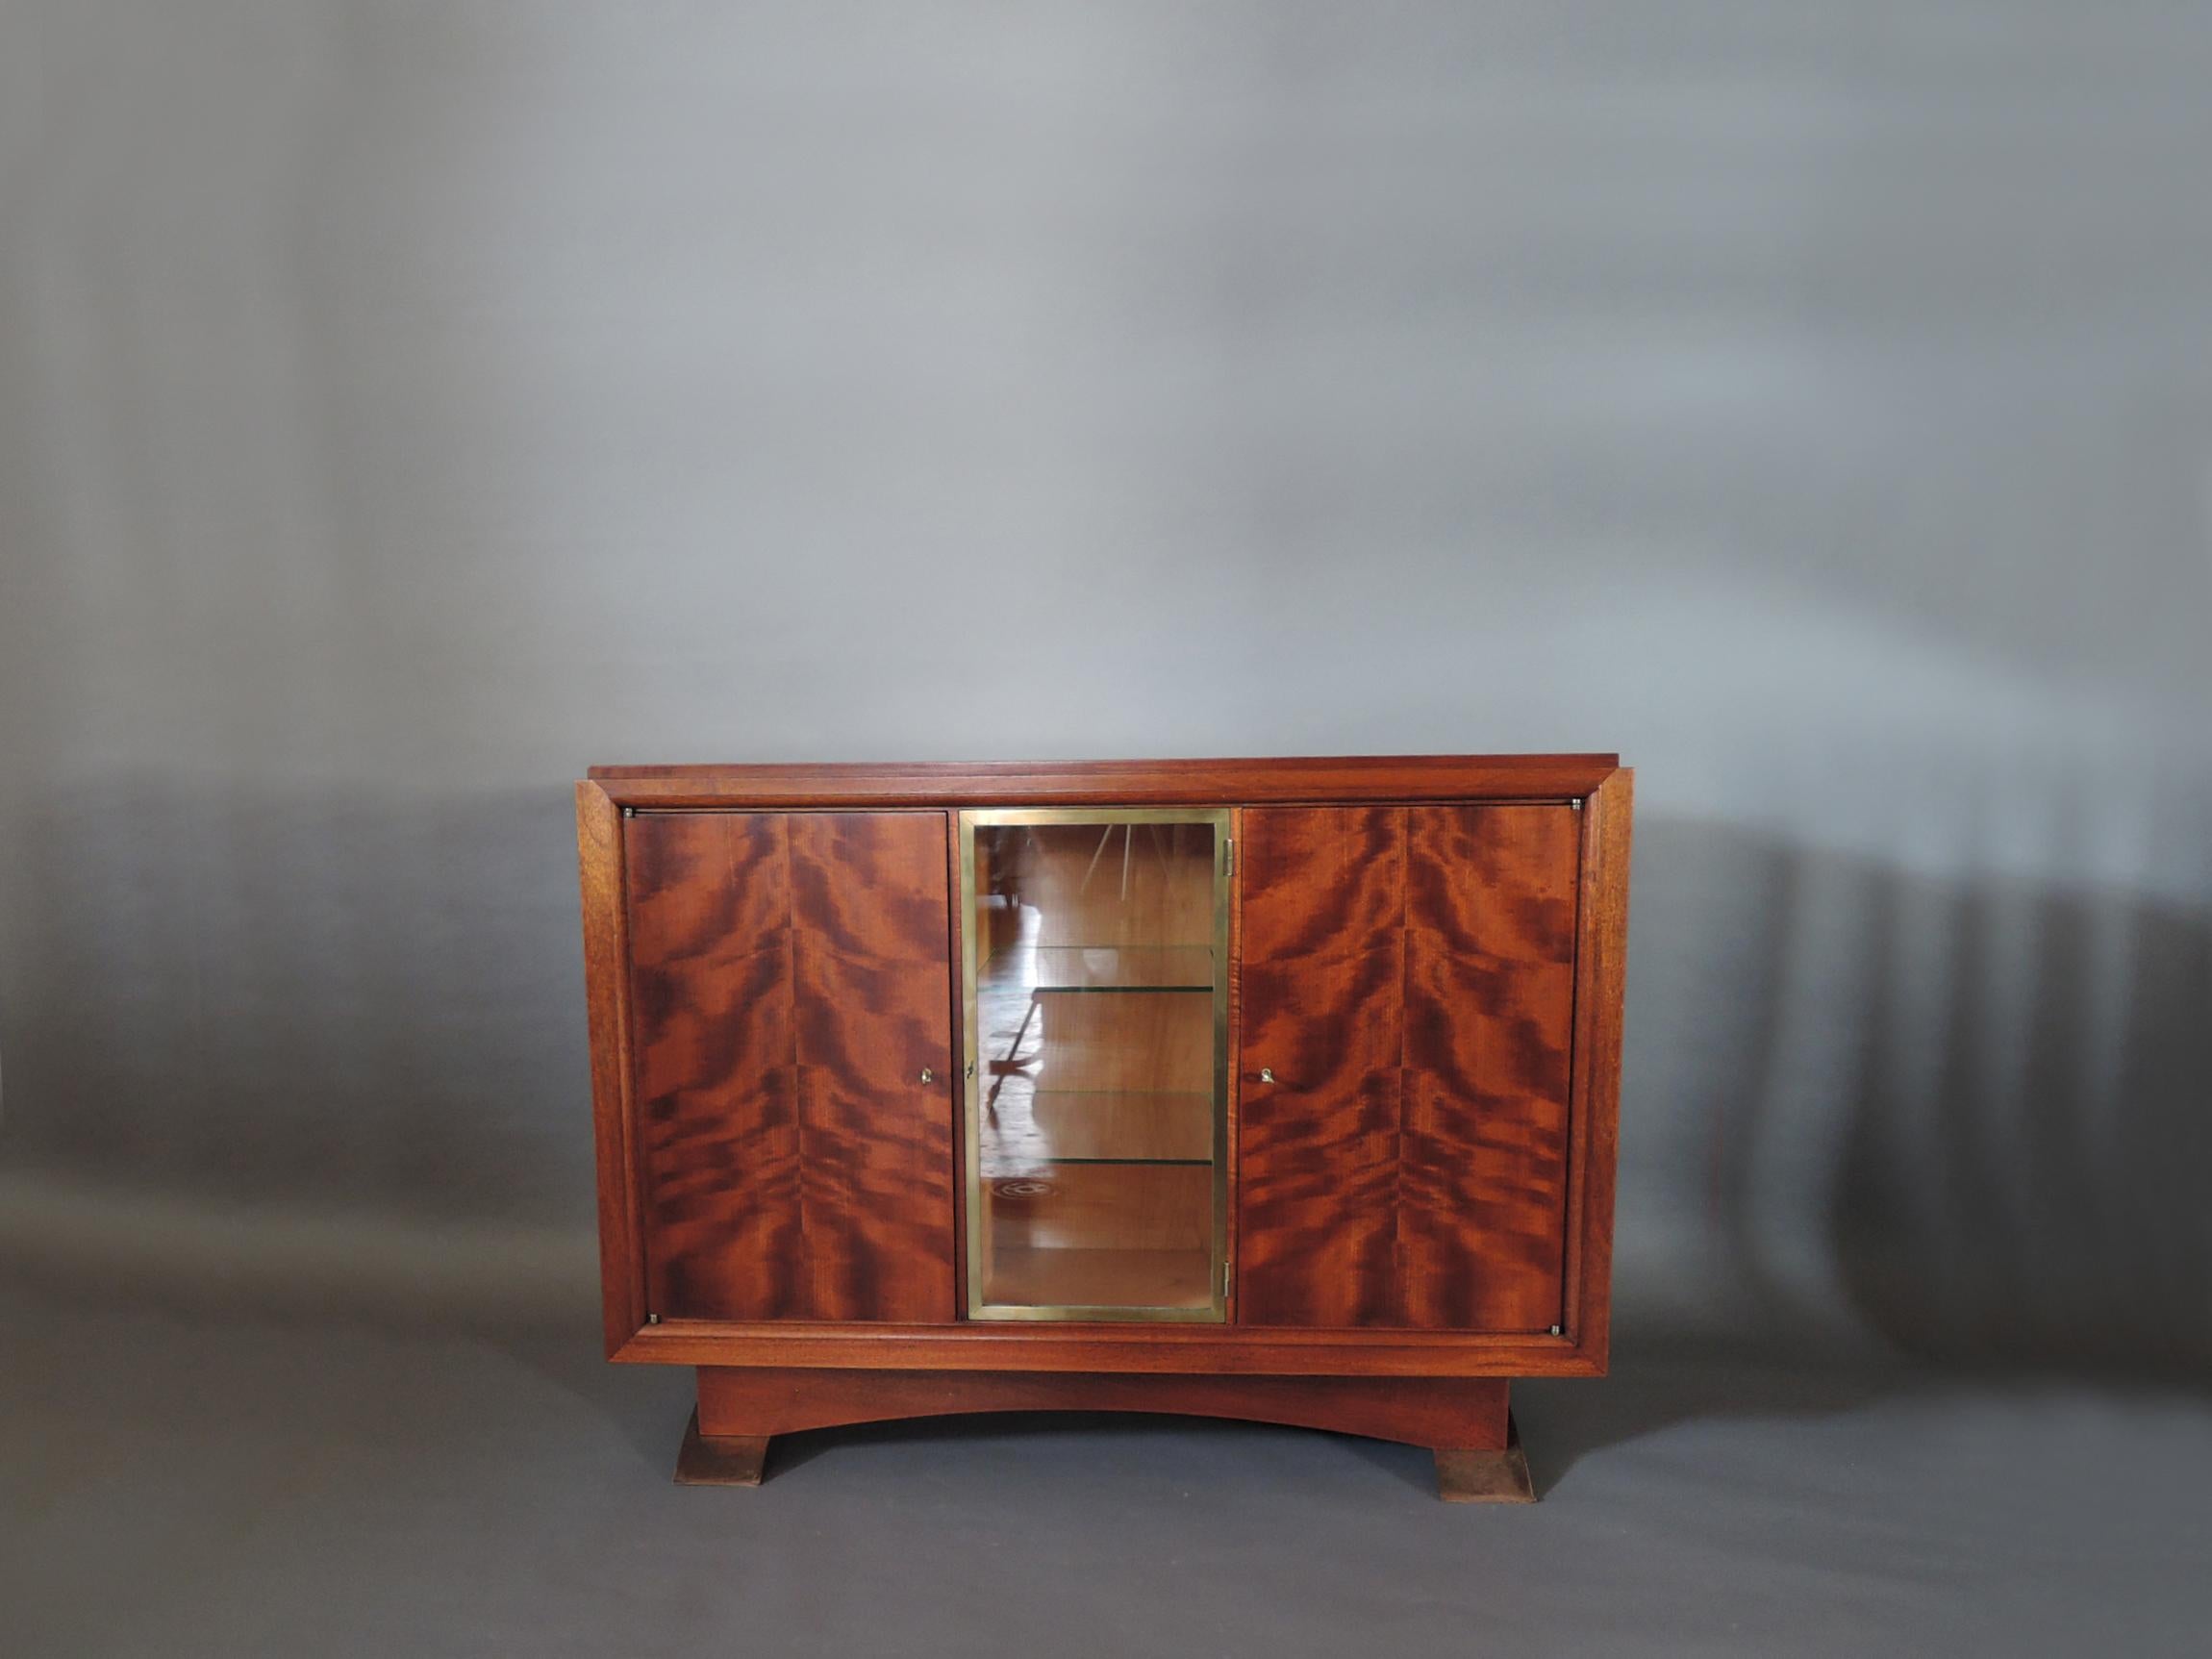 Albert-Lucien Guenot (1894-1993): A fine French Art Deco mottled mahogany cabinet with 1 central glass door in a bronze frame flanked by two wood doors; with bronze feet.
Edited by Pomone.
    